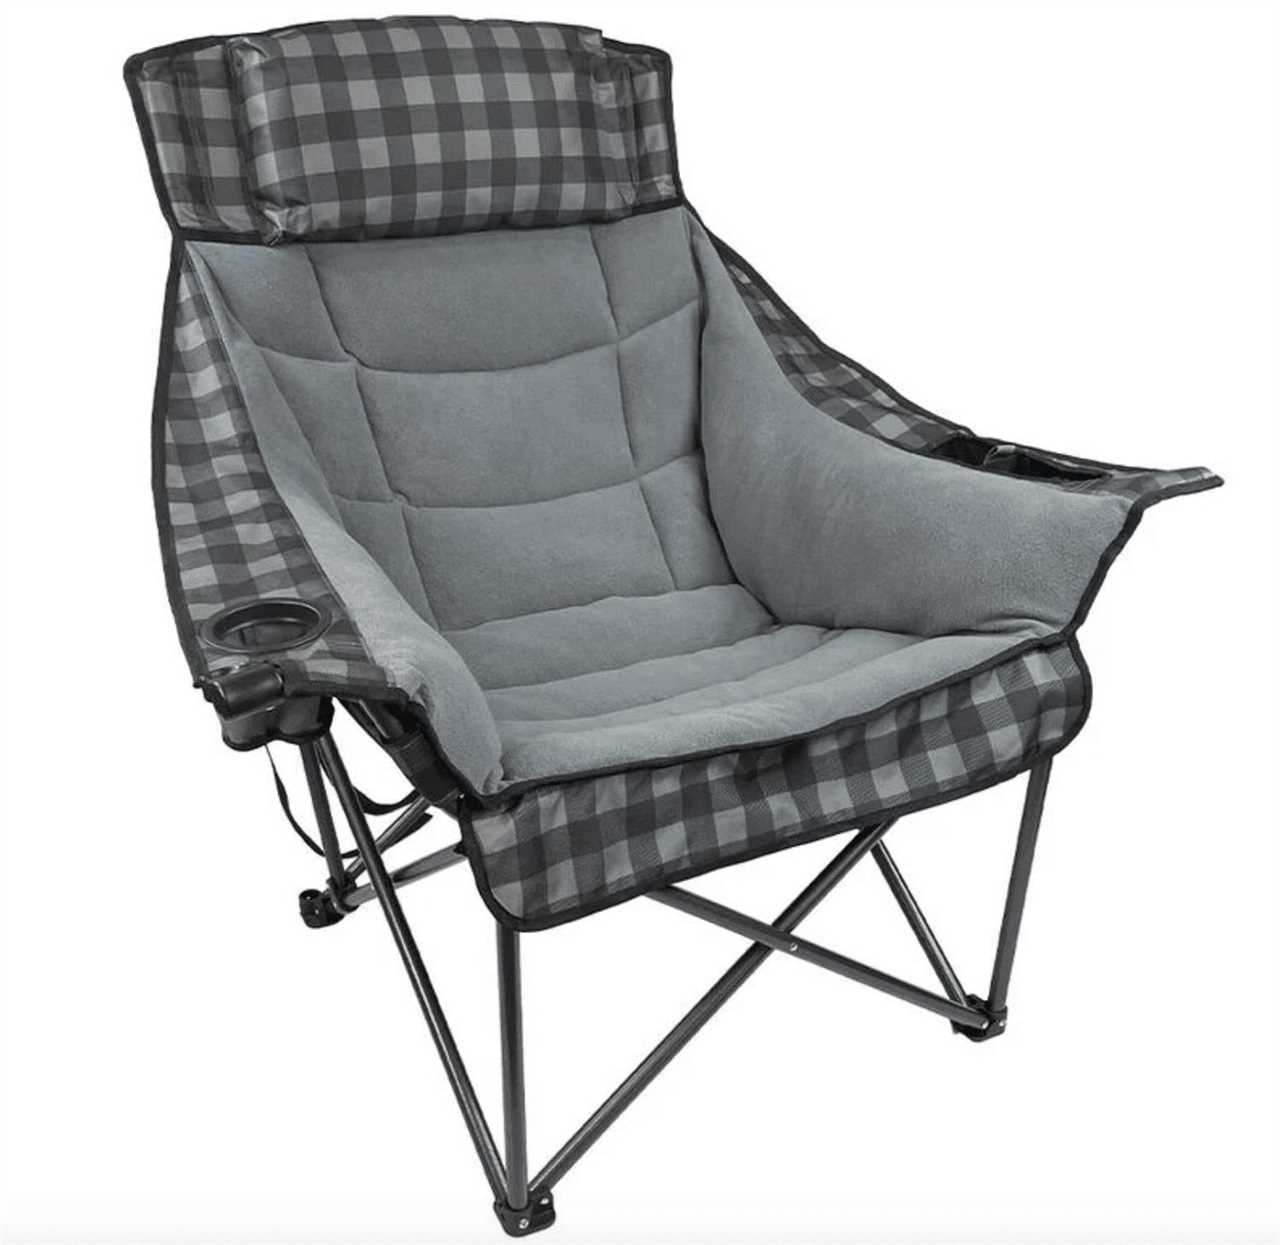 camp-chairs-camping-supplies-spring-camping-04-2023 